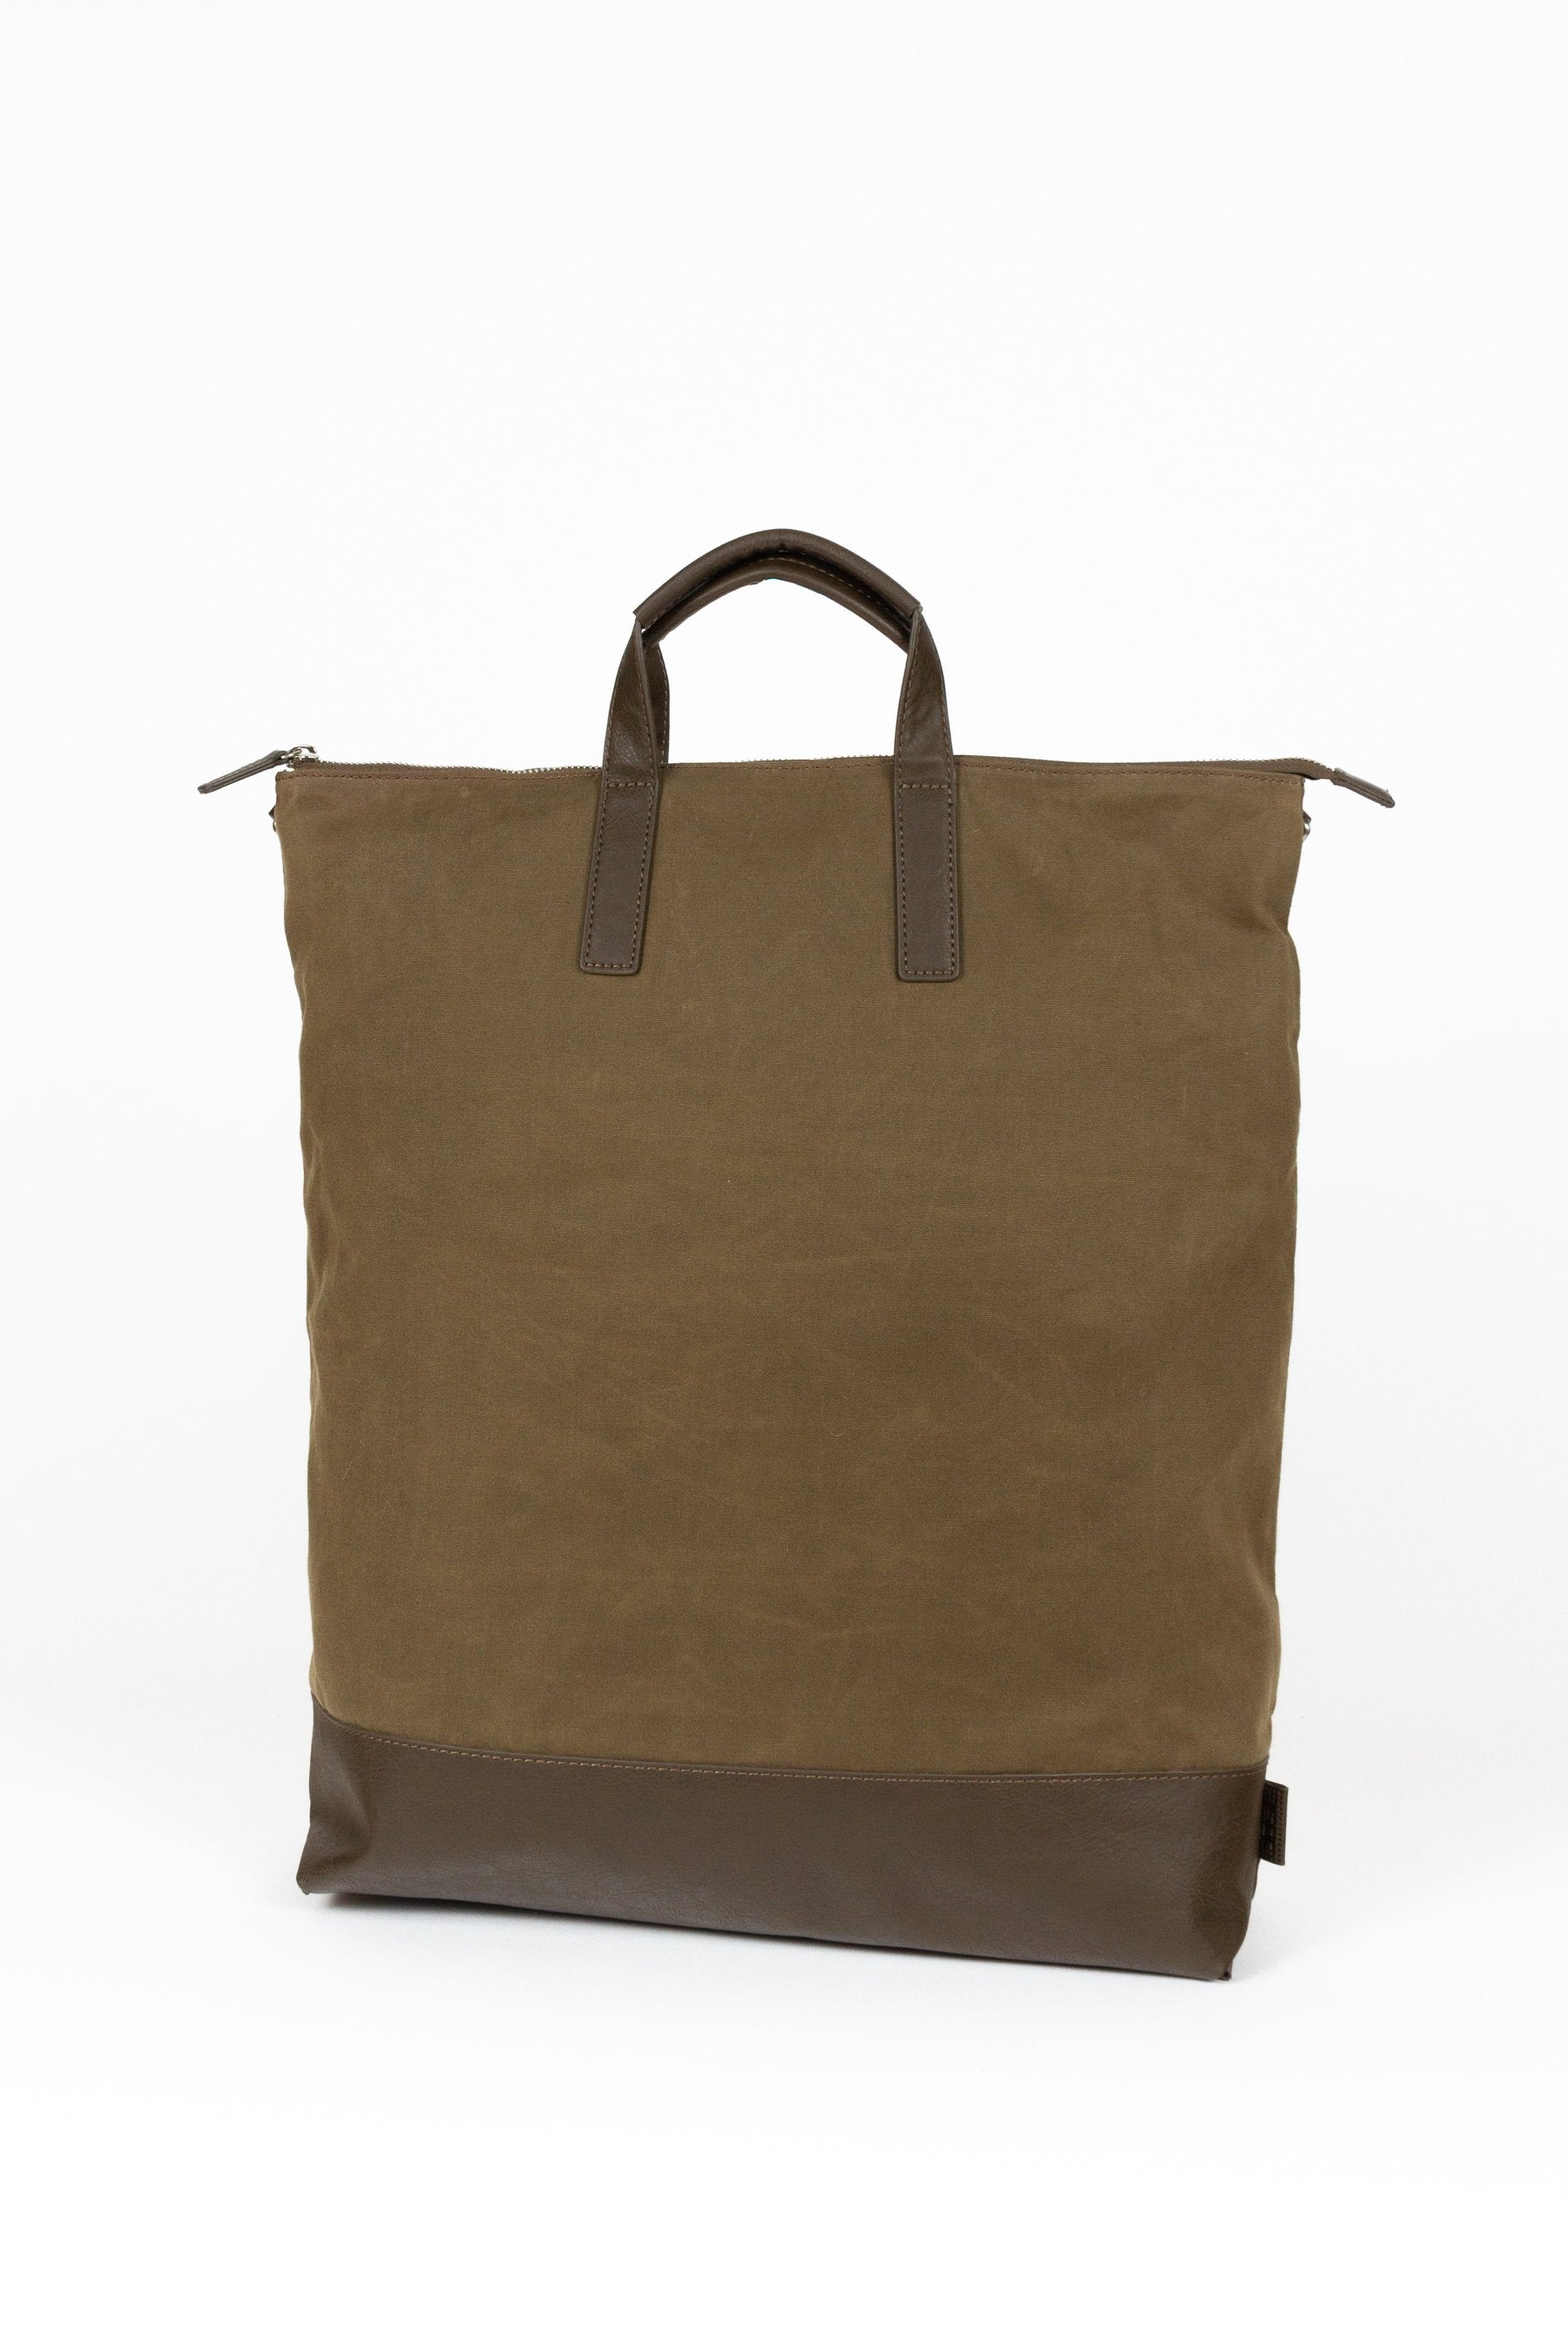 BEON.COM.AU Buy the Goteborg X-Change Bag in Olive by Jost Bags Jost at BEON.COM.AU